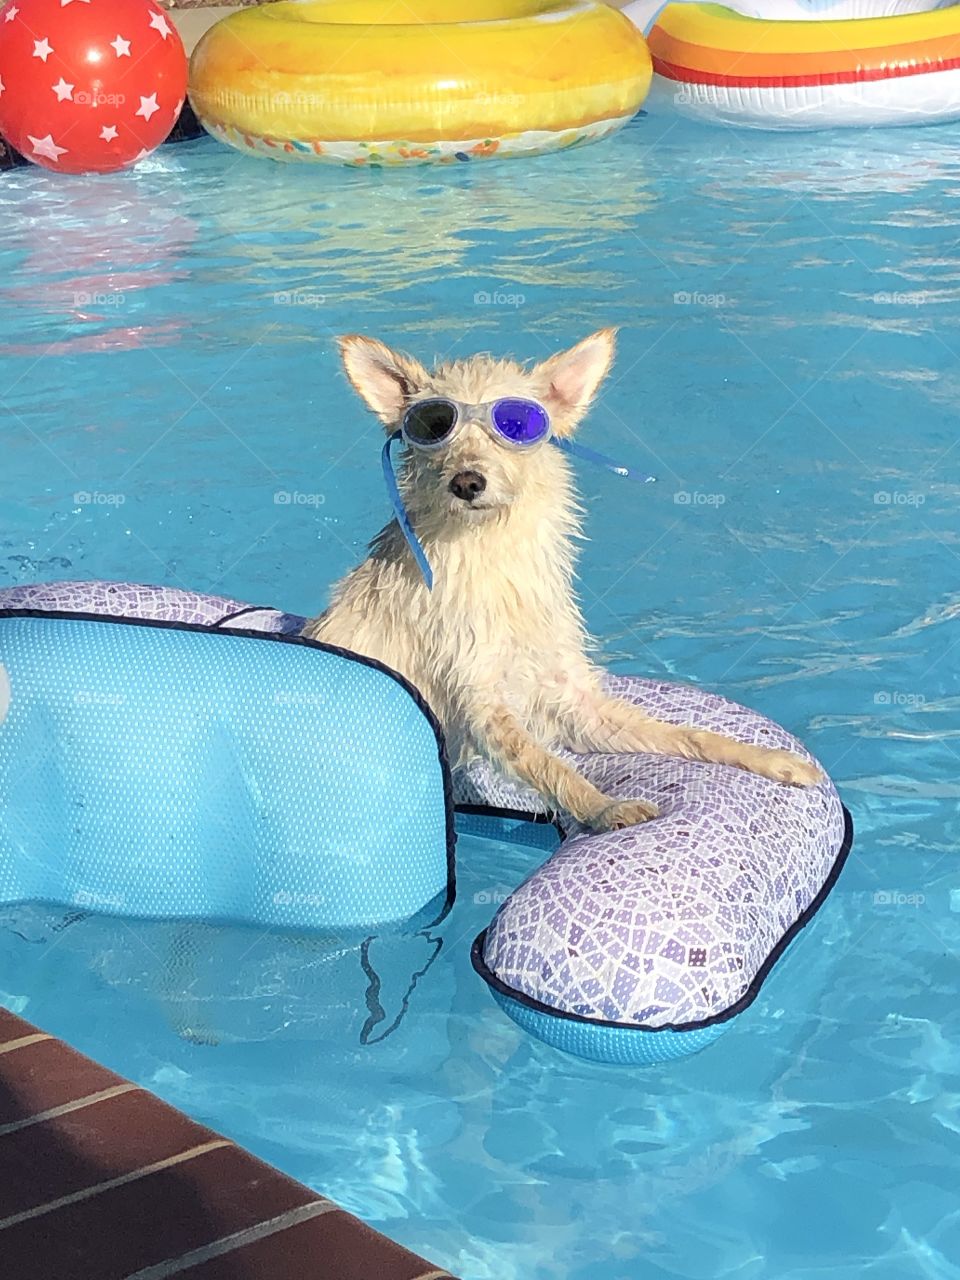 A cute and adorable puppy dog wearing swimming goggles hangs out in the pool during a bbq.